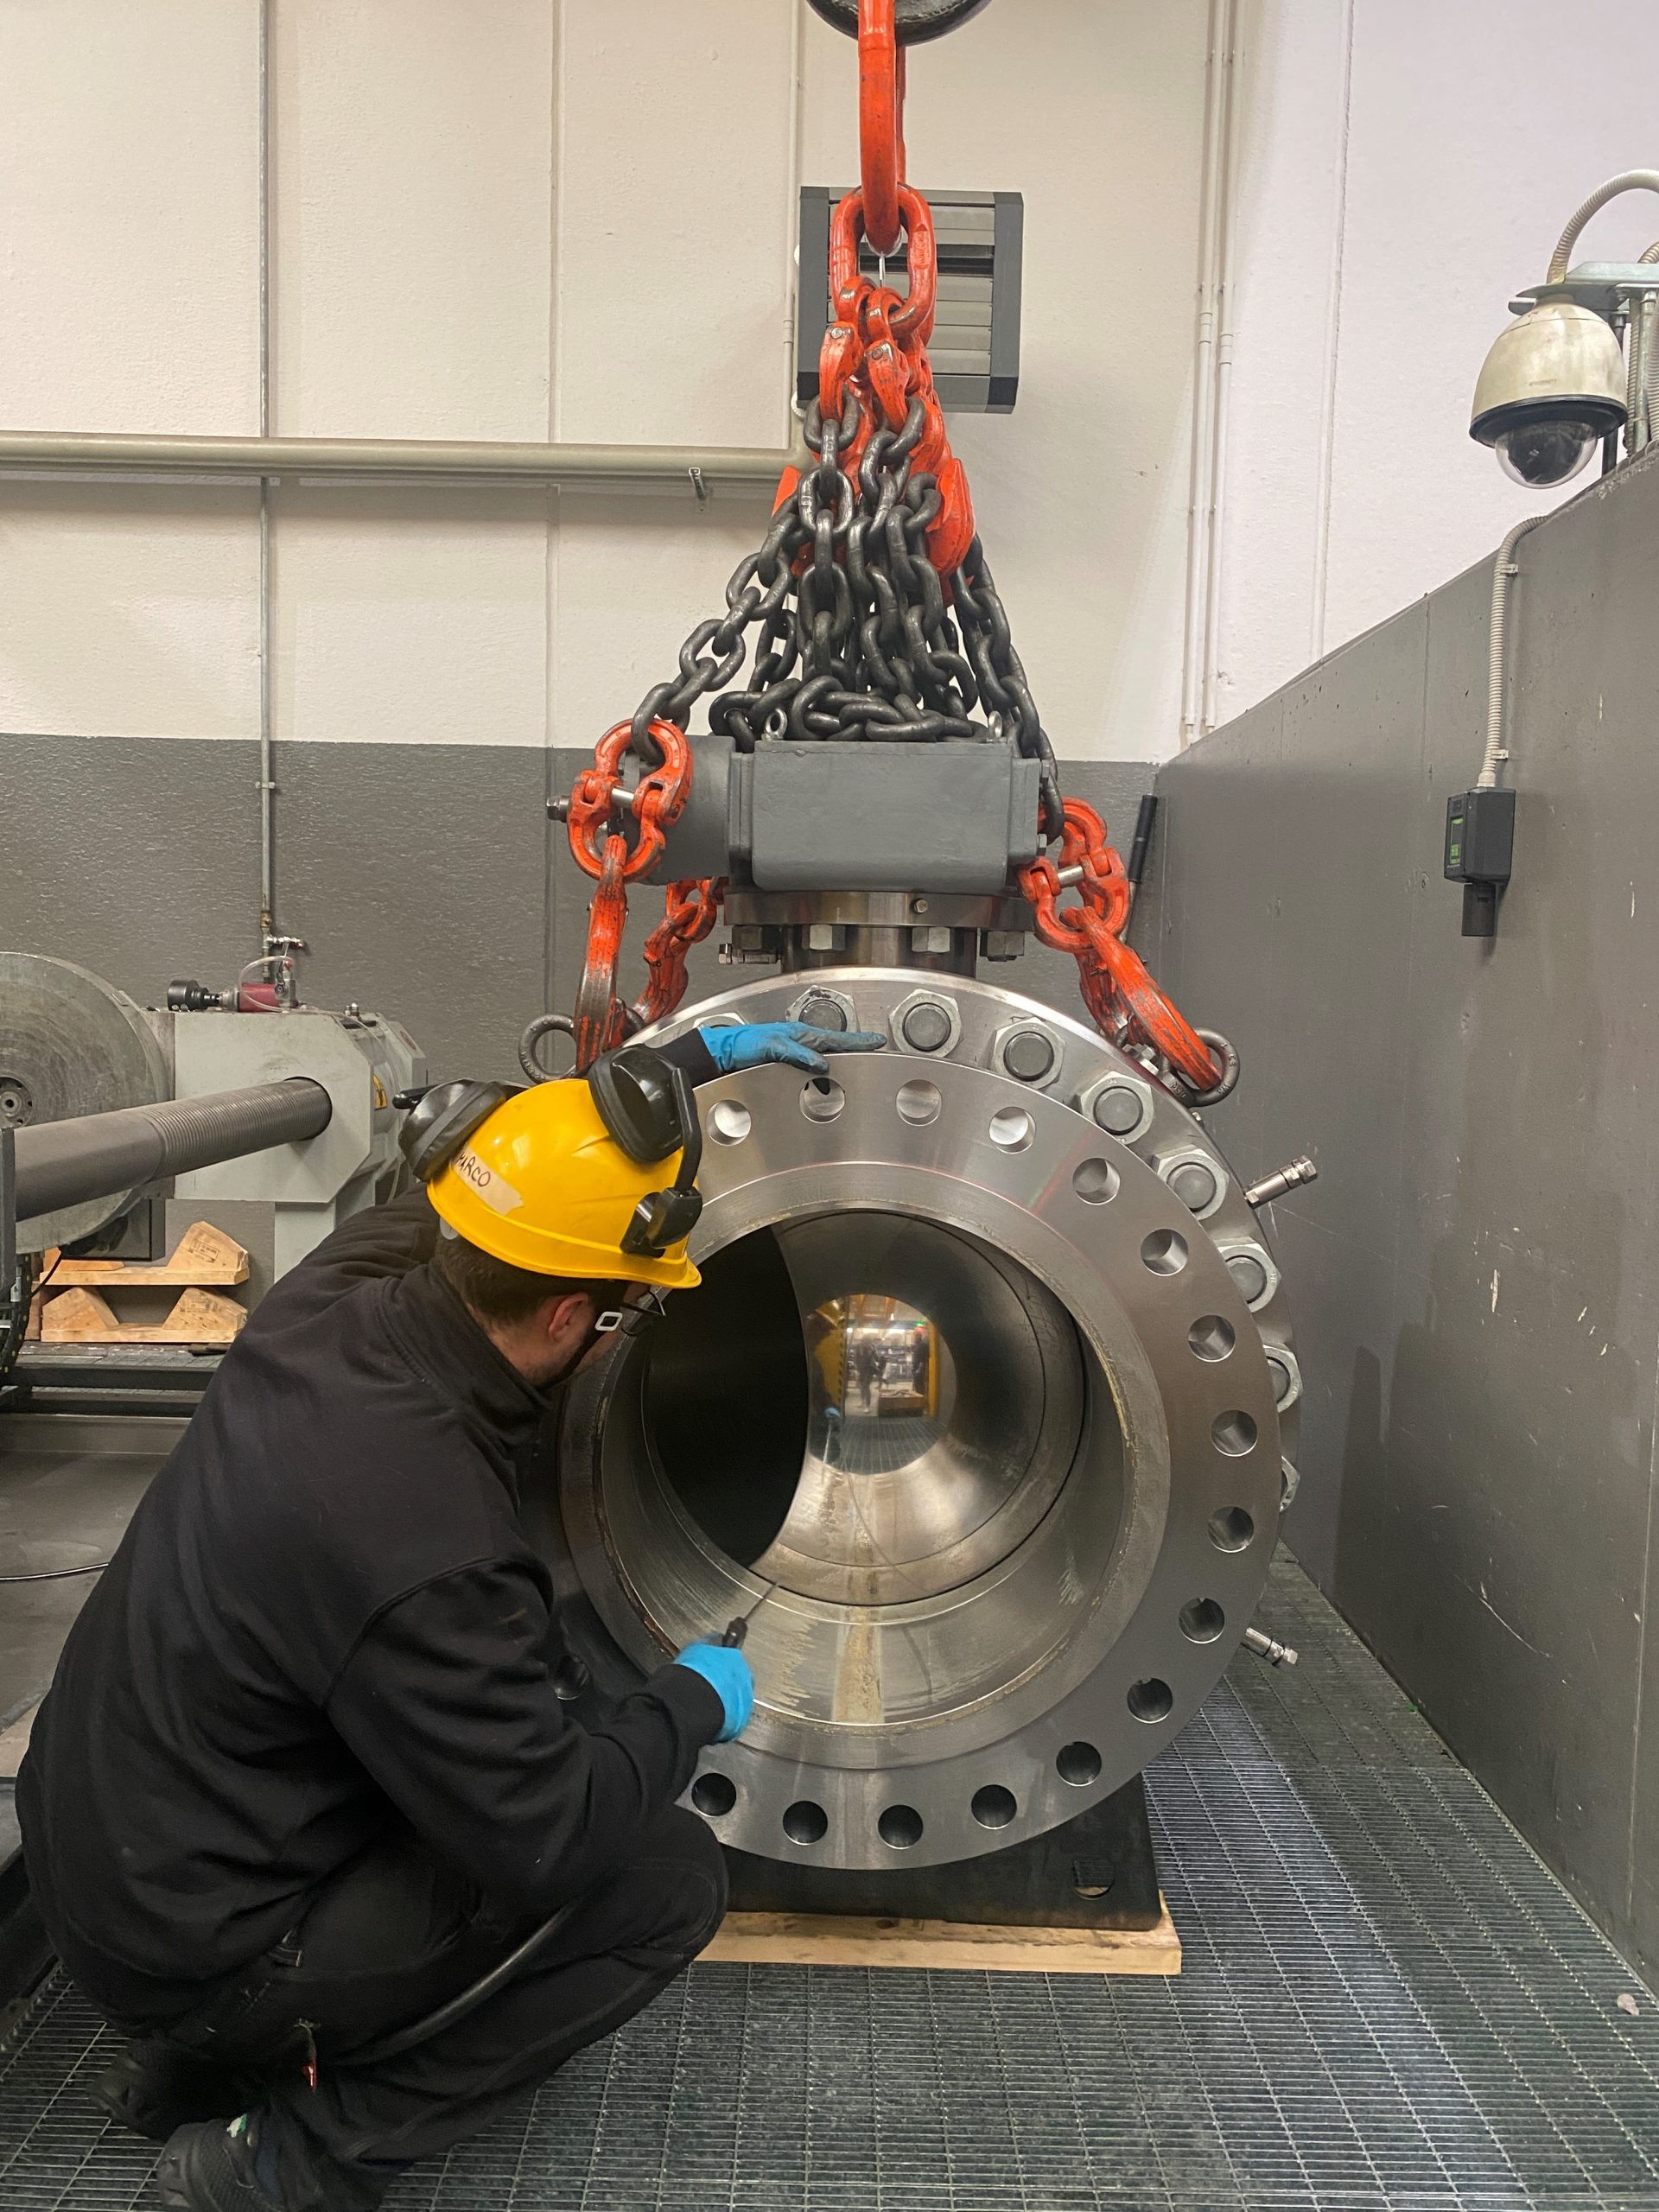 24” Class 600 Ball valve – Hydro-pneumatic test completed